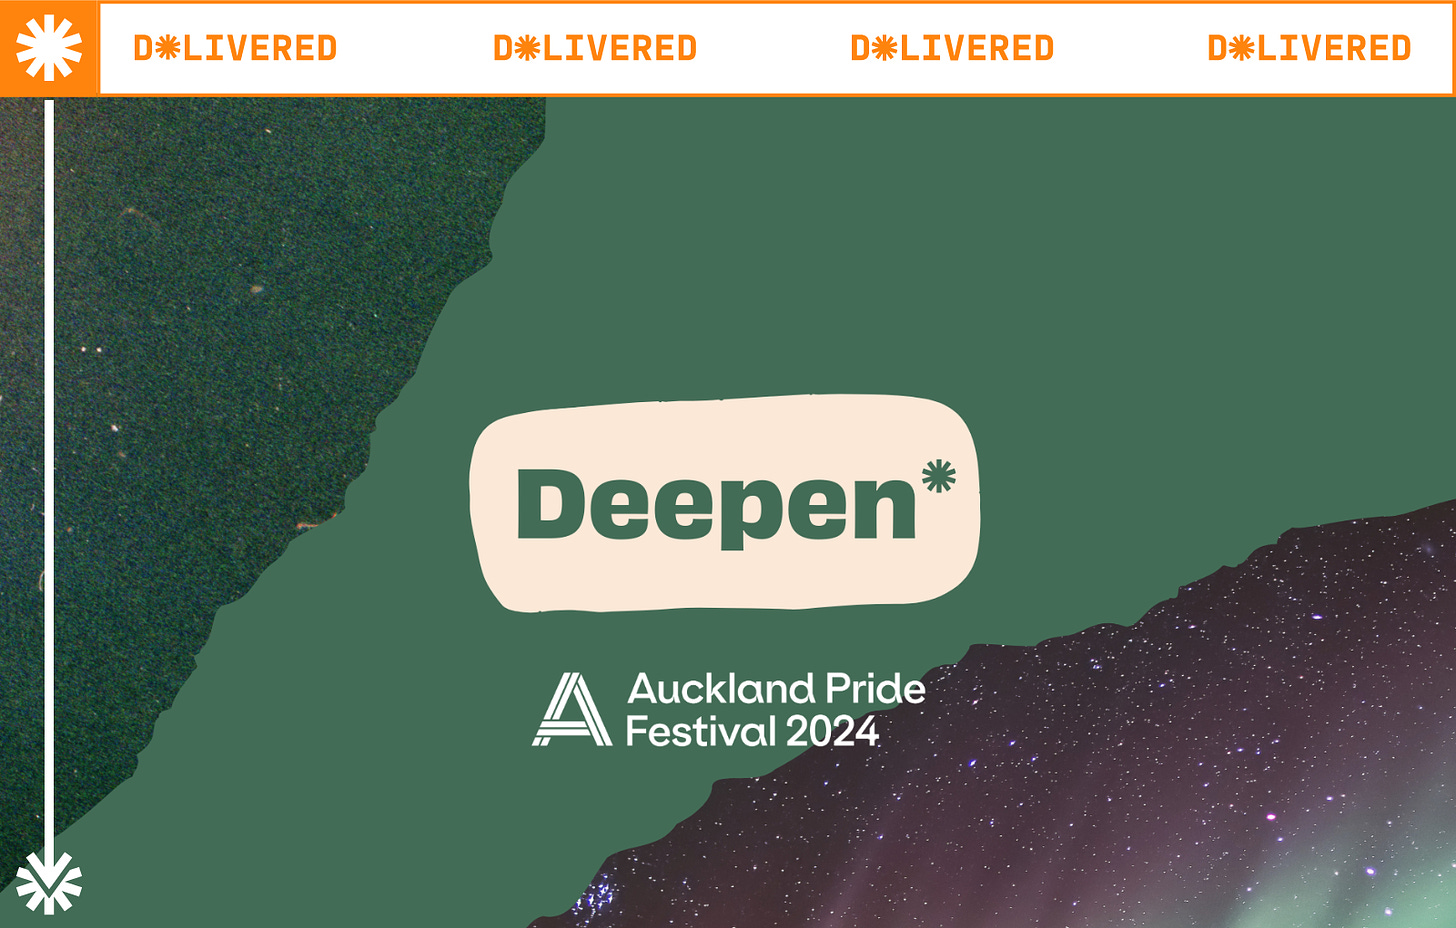 Image description: The word Deepen* is in green in front of a cream-coloured bubble, with strips of green and dark galaxies in the background.